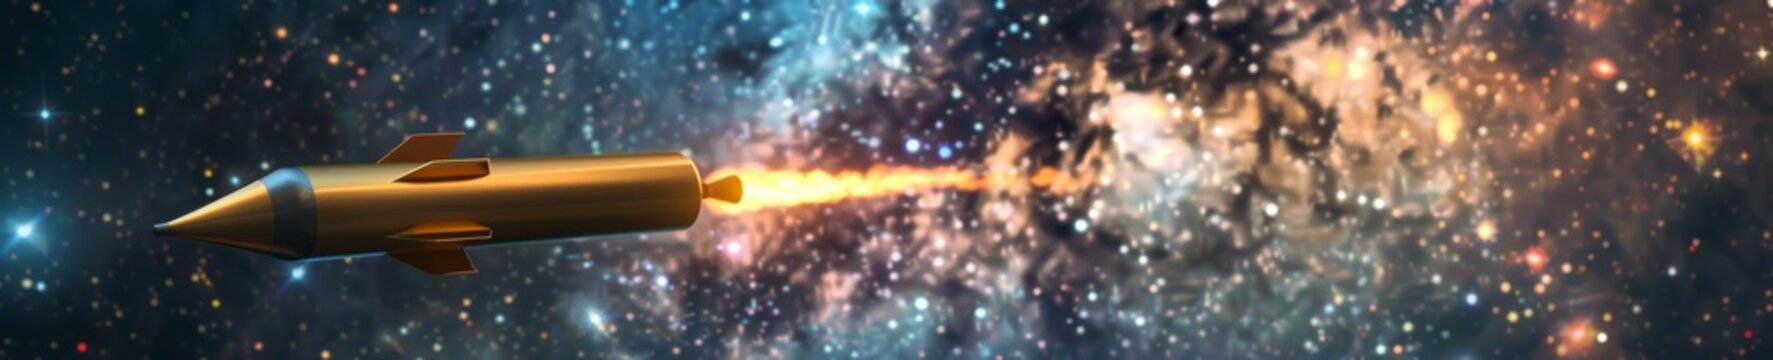 3D model of a golden rocket launching to the moon against a backdrop of glittering stars and galaxies